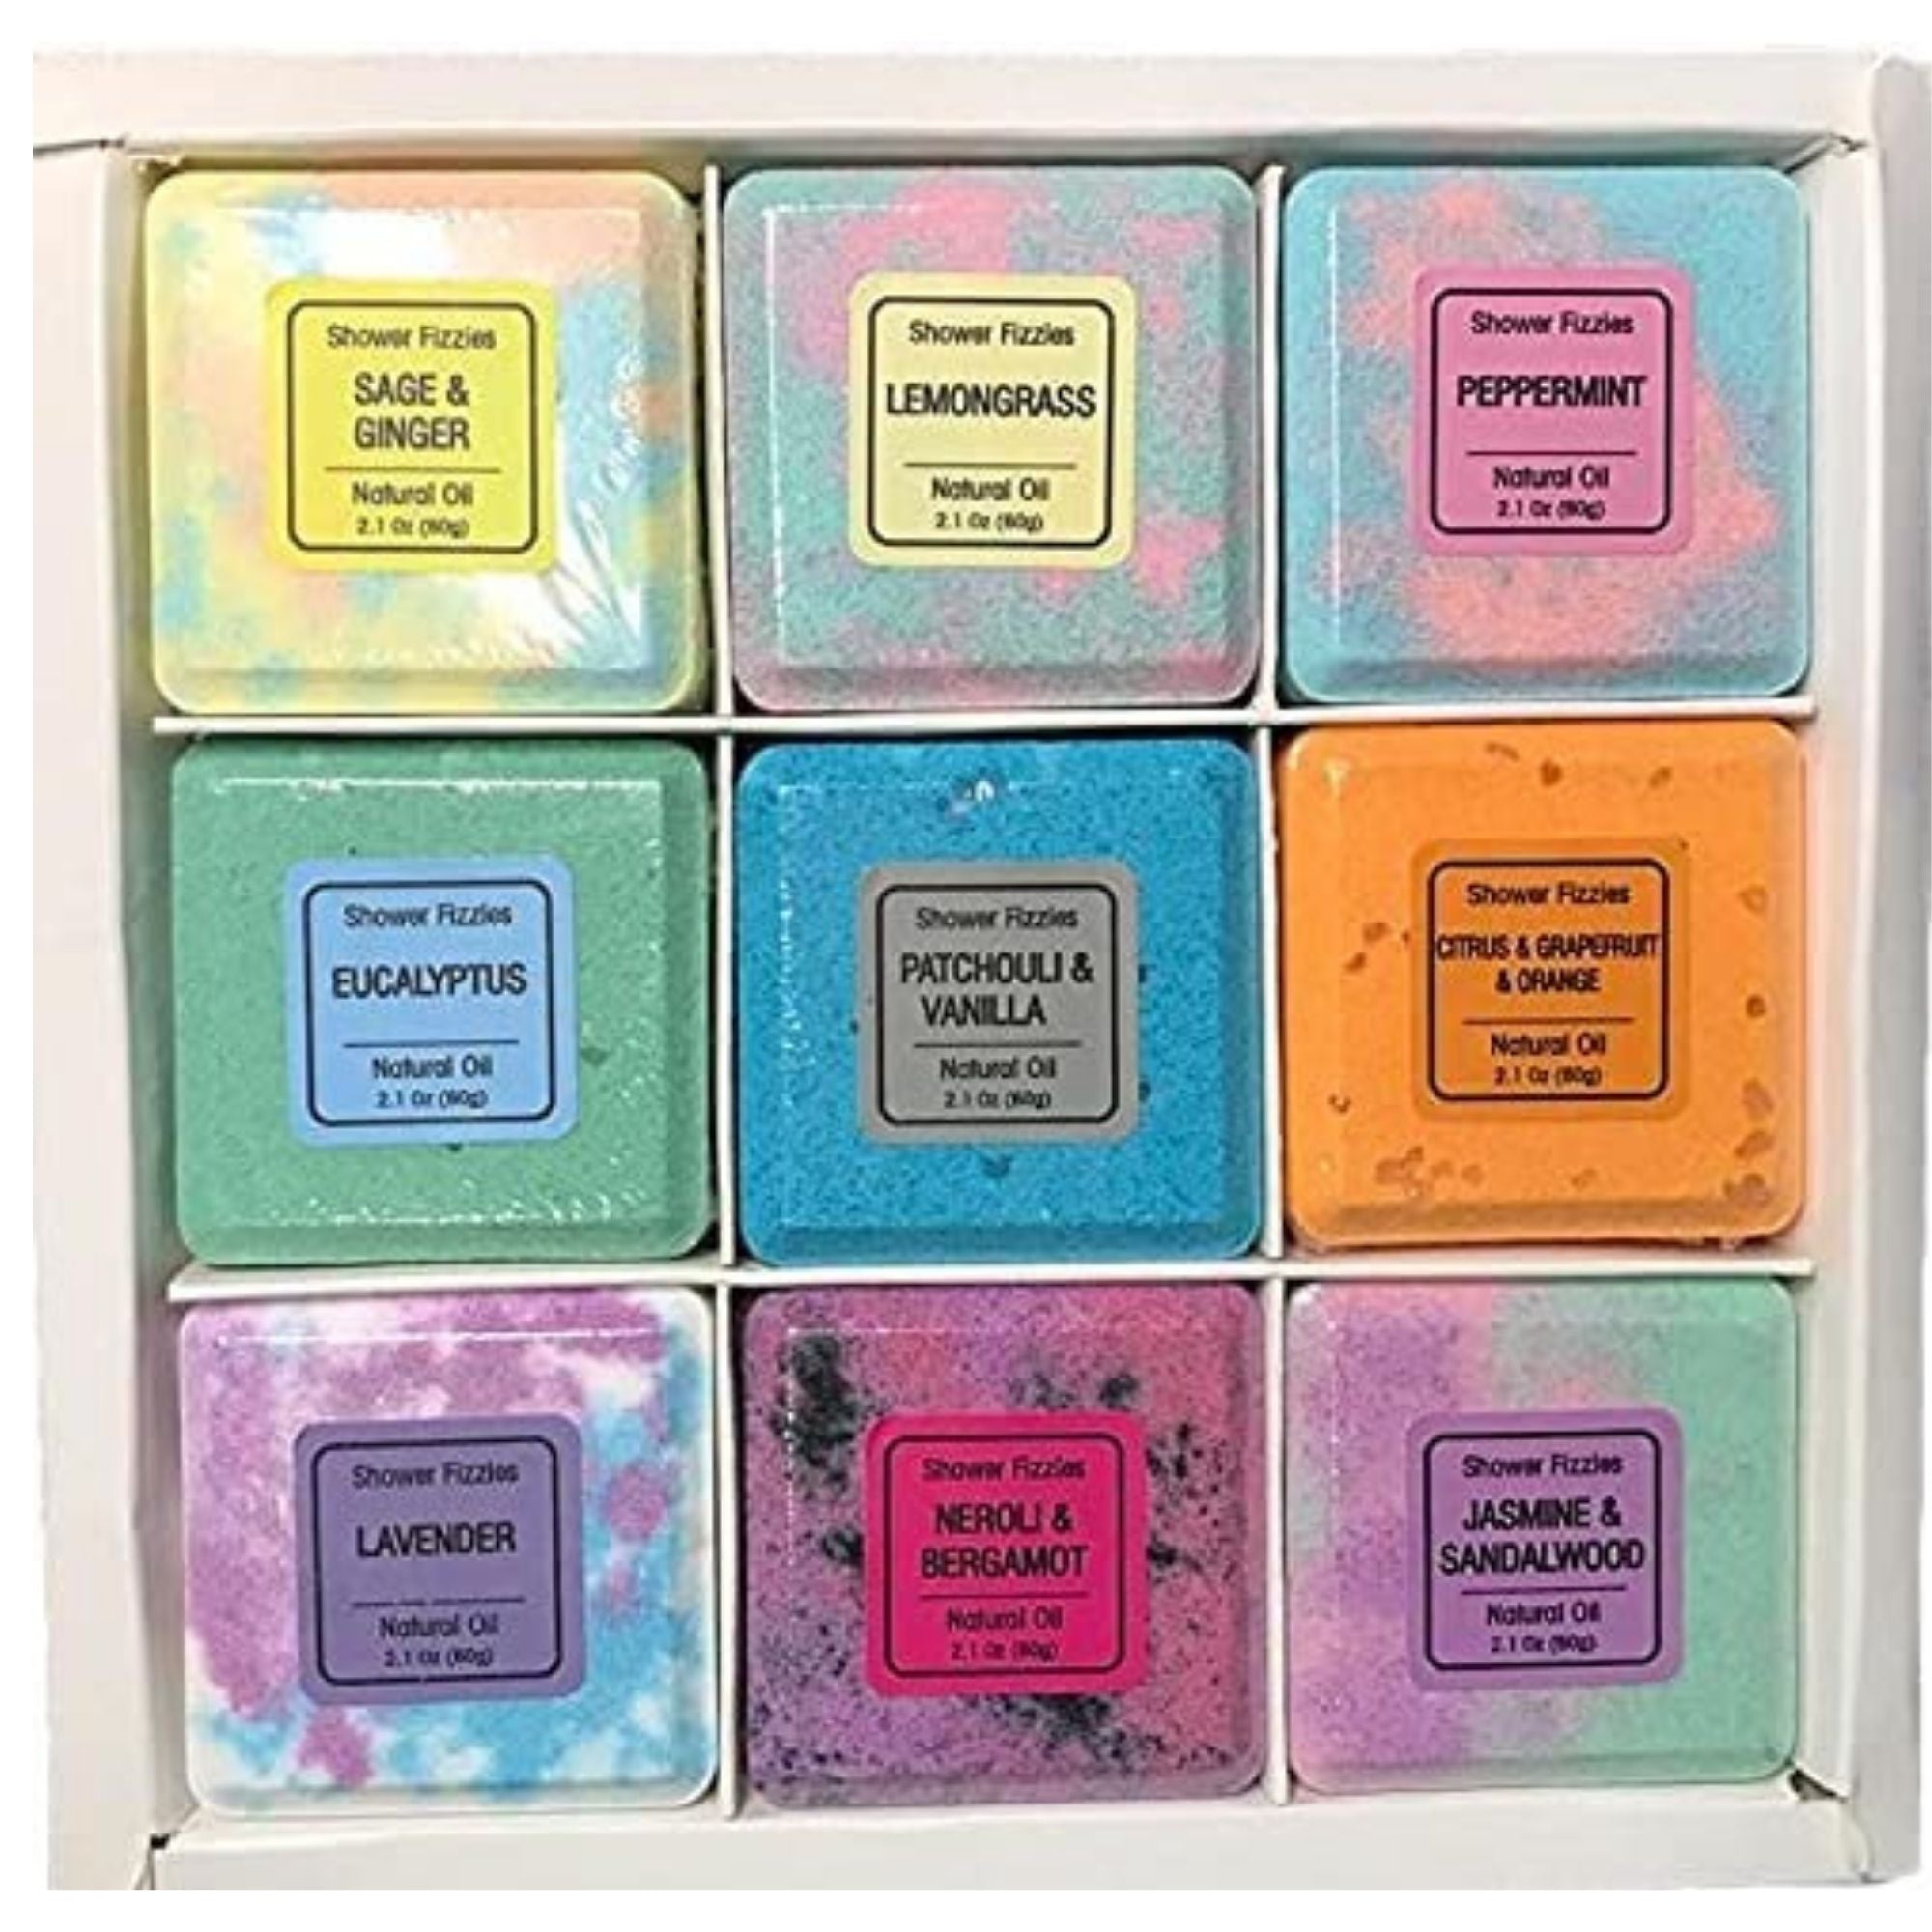 Aromatherapy Shower Steamers - Variety Pack Of 9 Shower Bombs with Essential Oils